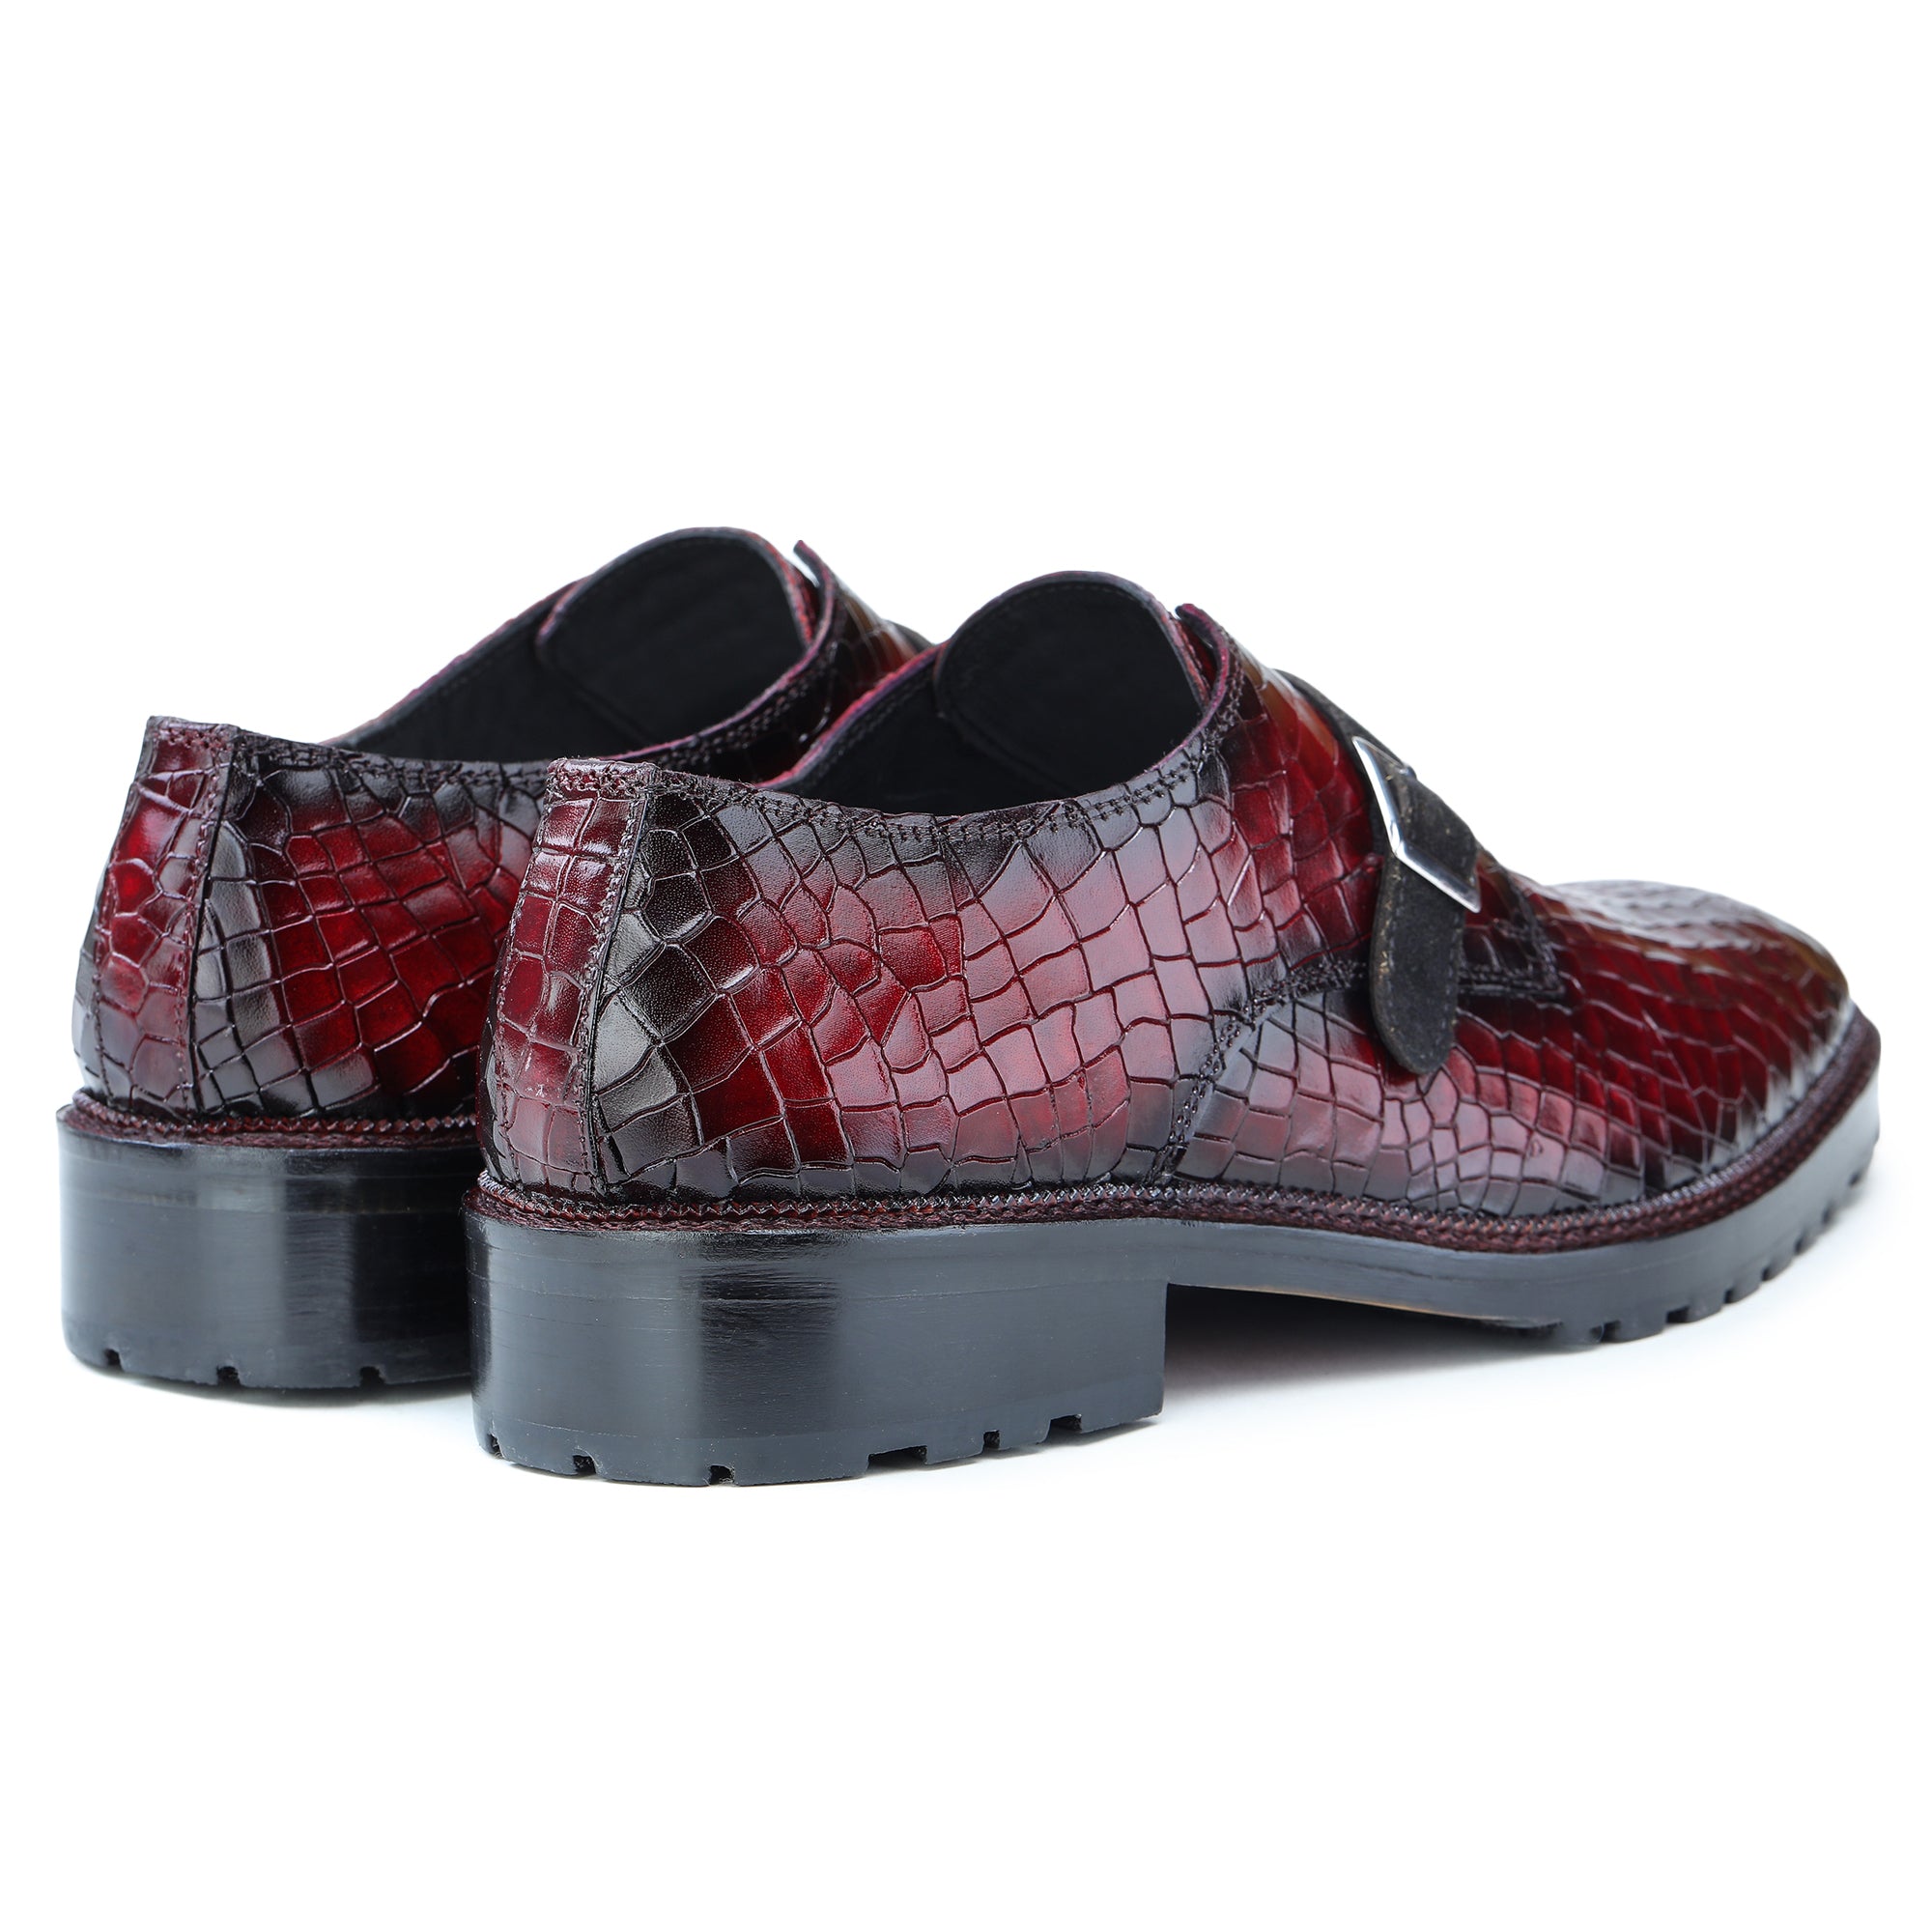 Stoutmoedig Durf Ontrouw Single Monk Strap - Croc Wine Red by Lethato